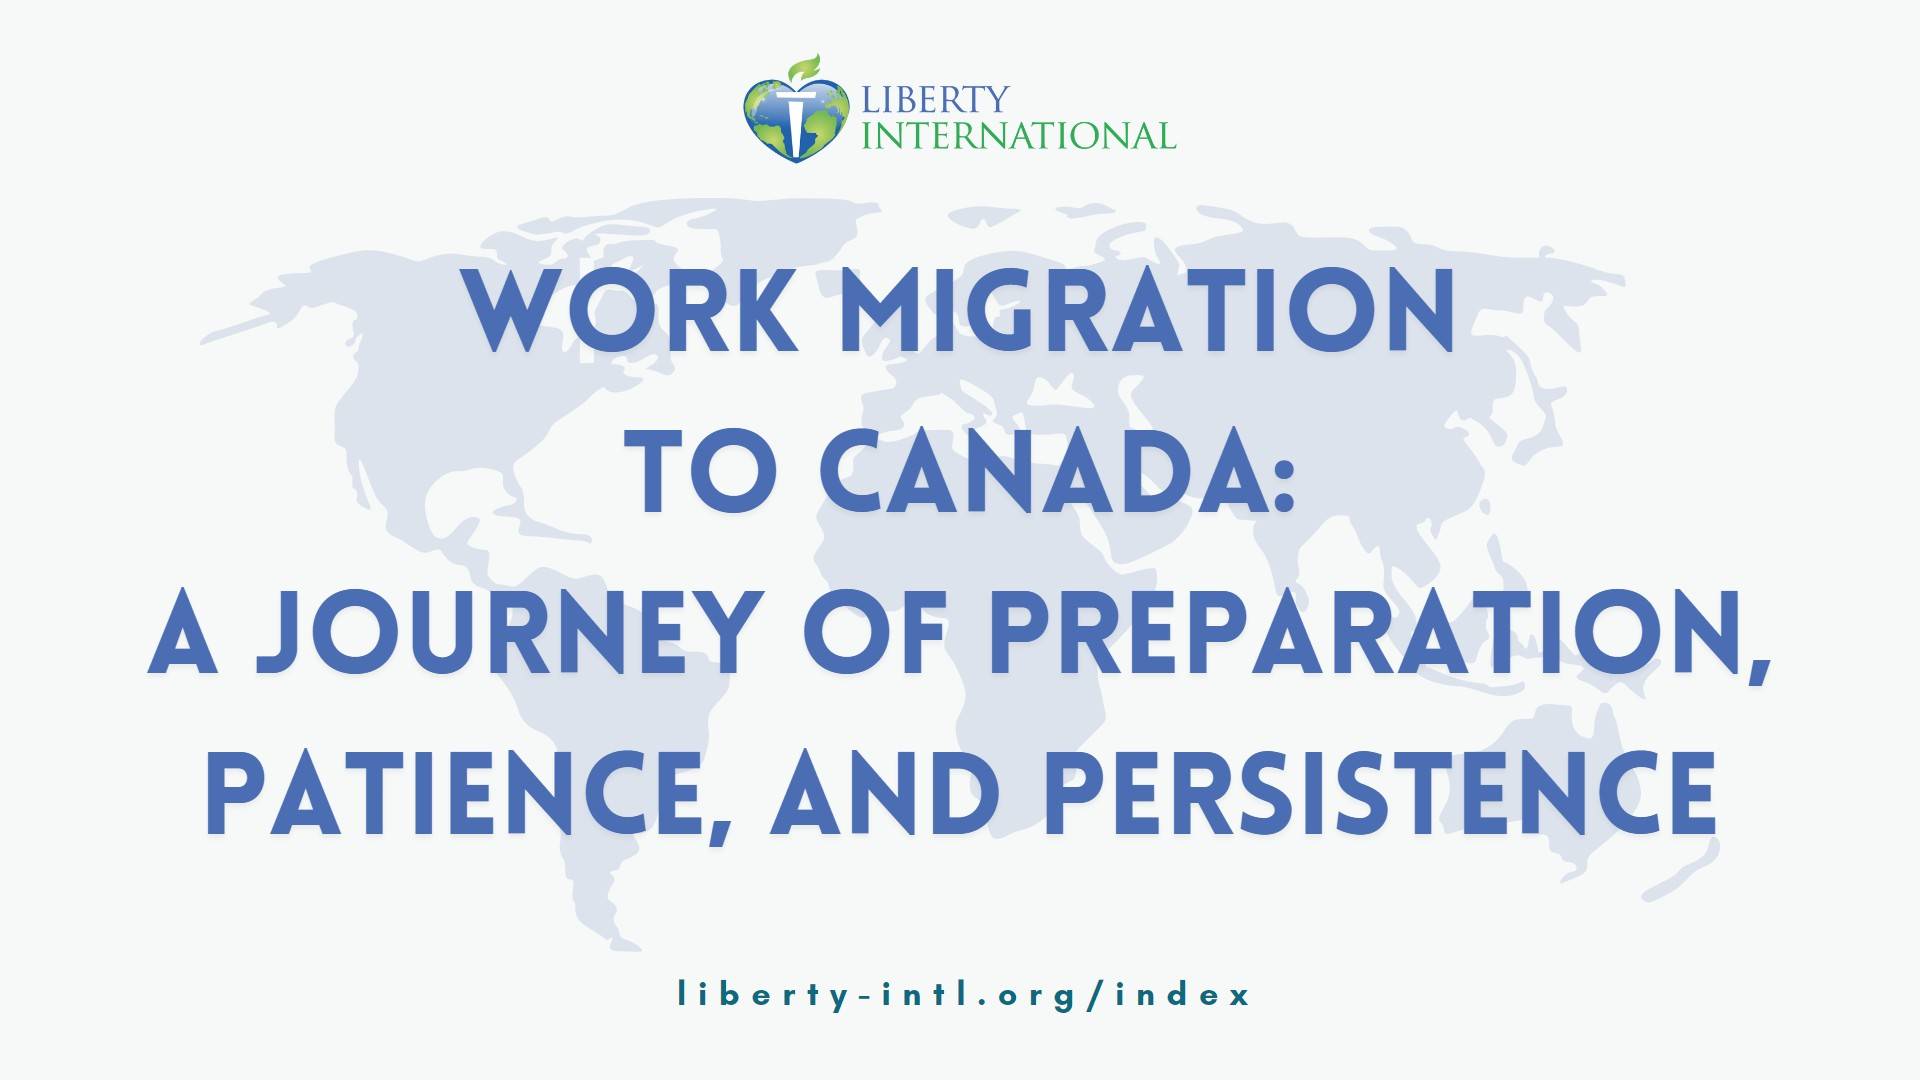 Work migration to Canada: a journey of preparation, patience, and persistence